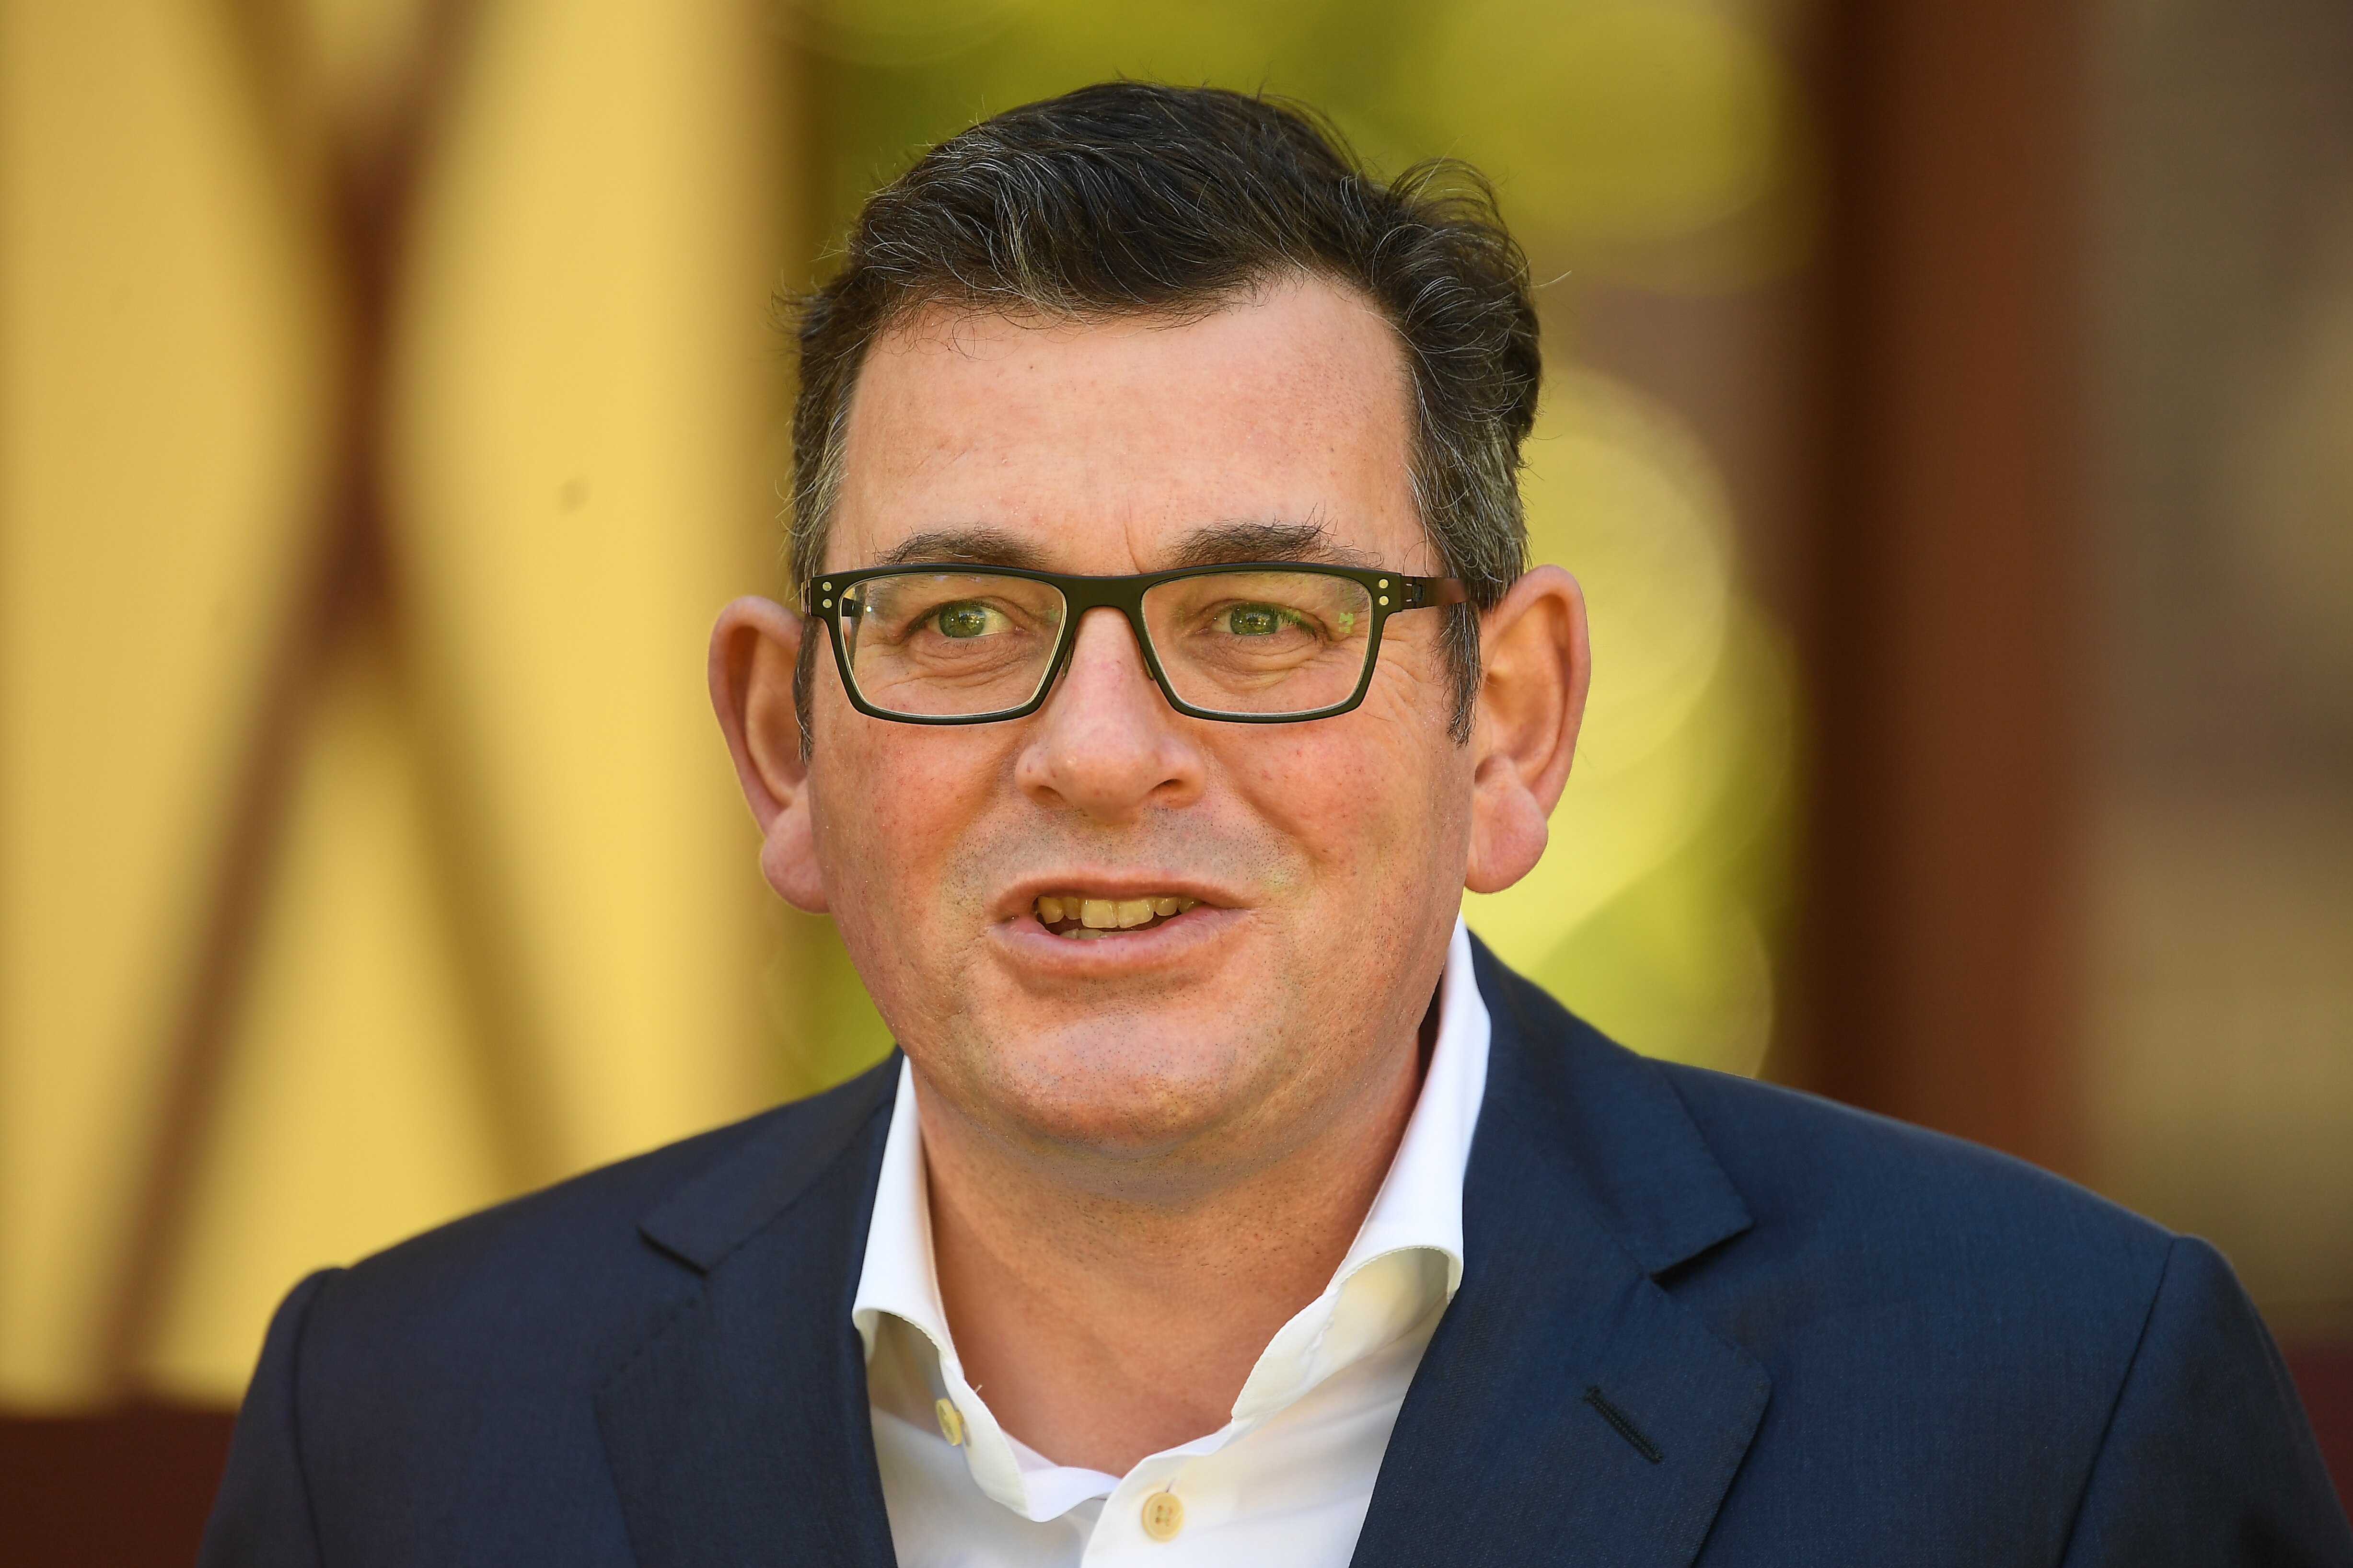 Victorian Premier Daniel Andrews addresses the media during a press conference in Melbourne, Wednesday, September 8, 2021. Victoria has recorded 221 new cases of locally acquired Covid19 in the past 24 hours. (AAP Image/James Ross) NO ARCHIVING